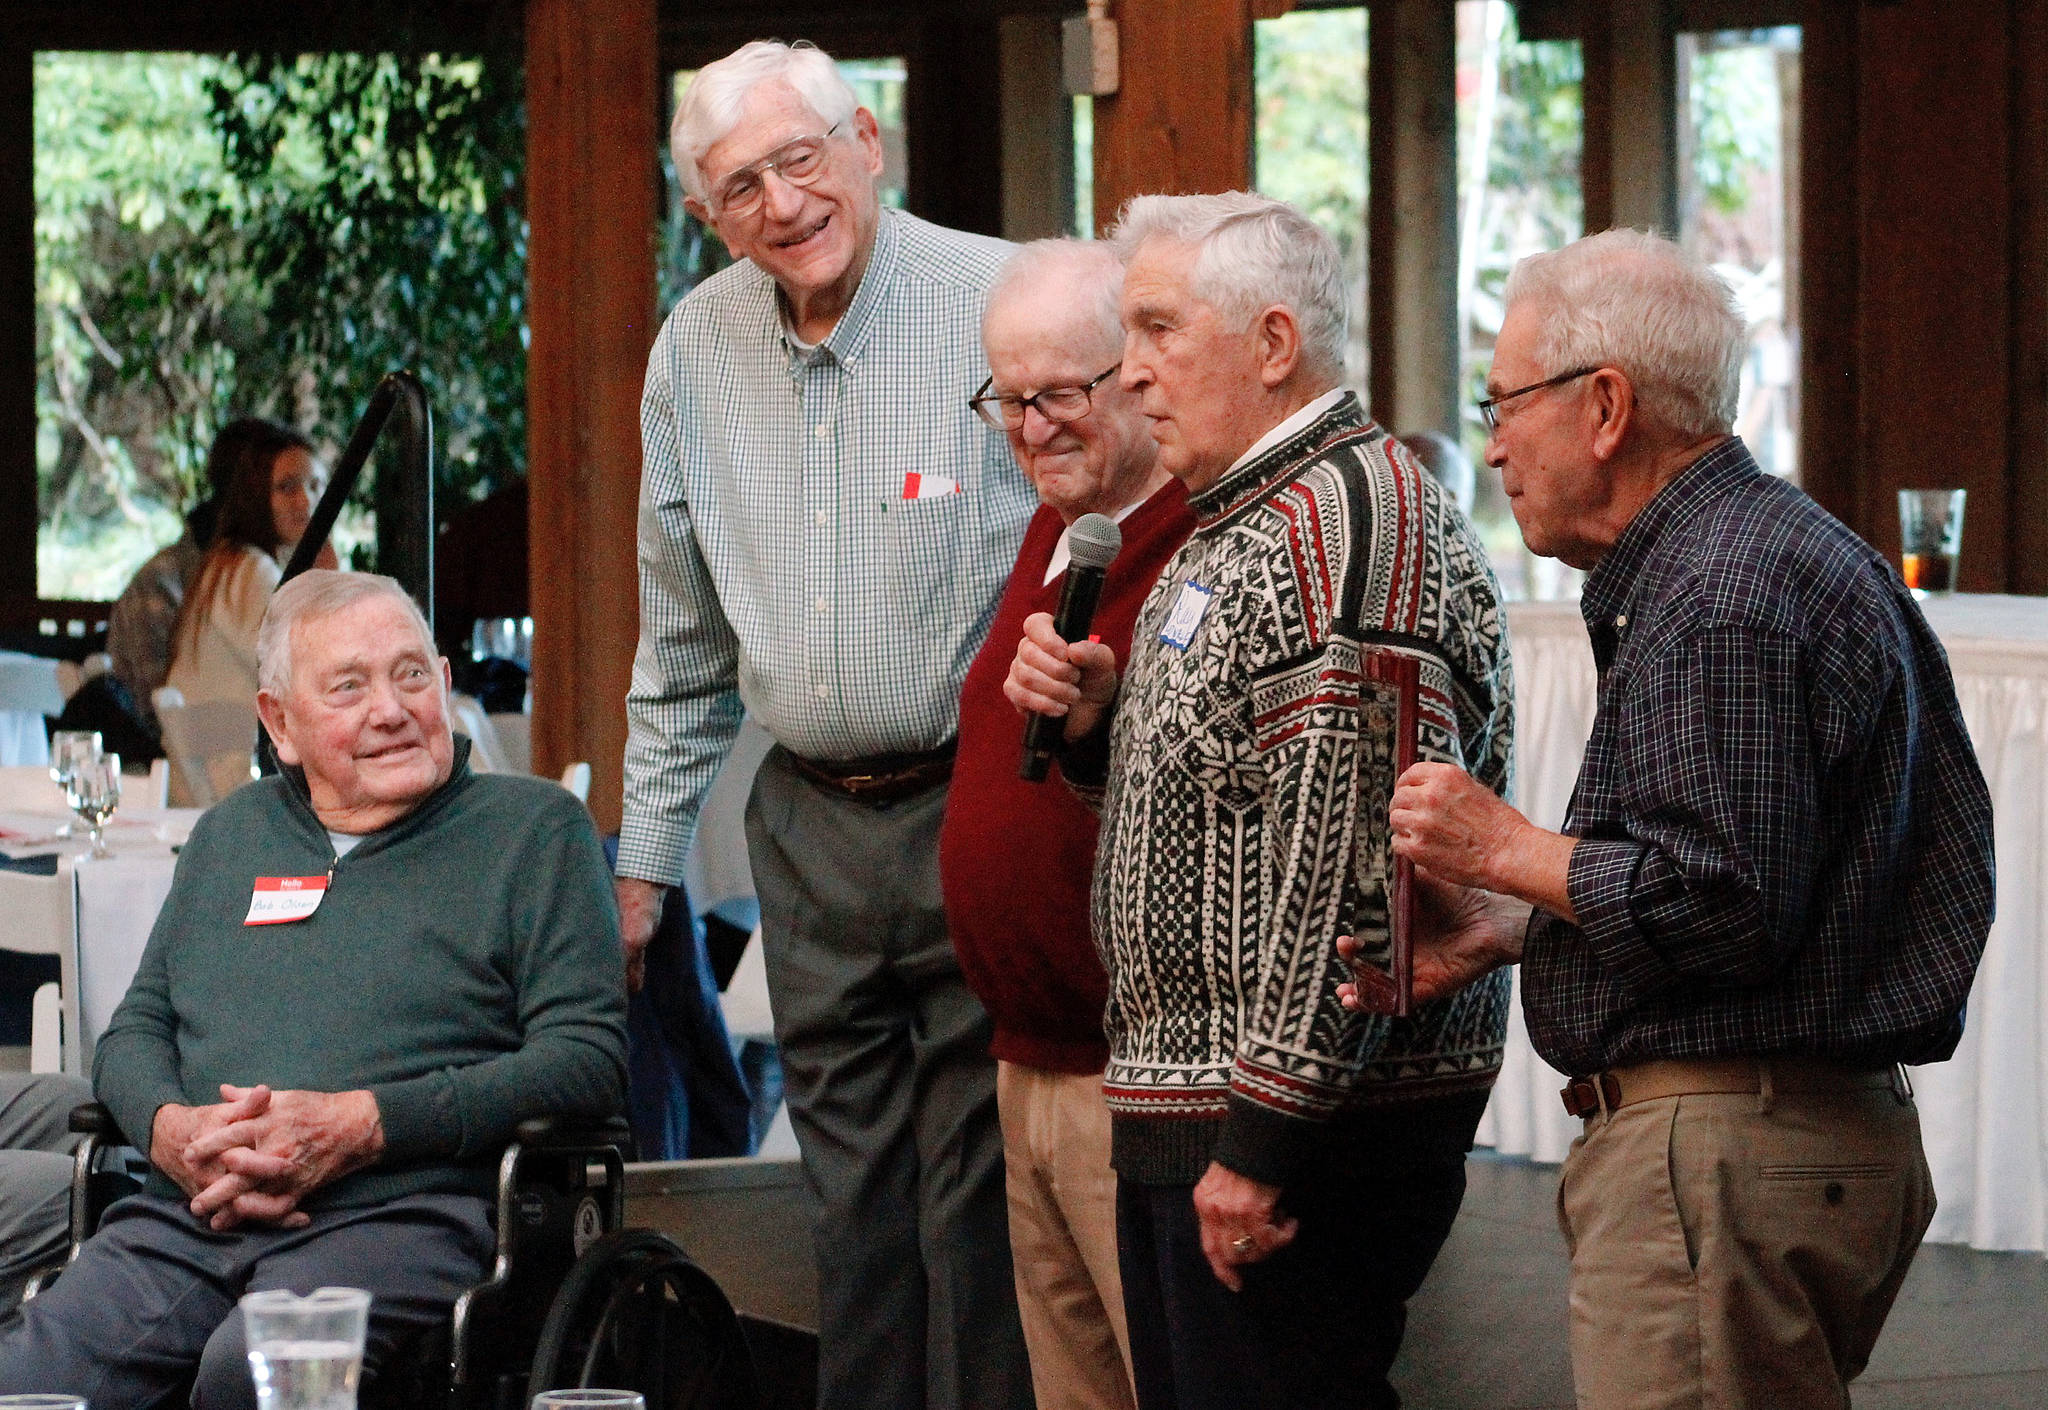 Members of Bainbridge’s 1948 state championship basketball team reminisce about their memorable season as they were inducted to the Kitsap Sports Hall of Fame in January. From left to right: Bob Olsen, Bob Woodman, Sam Clarke, Ray Lowrie and Jim Nadeau. (Mark Krulish/Review file photo)